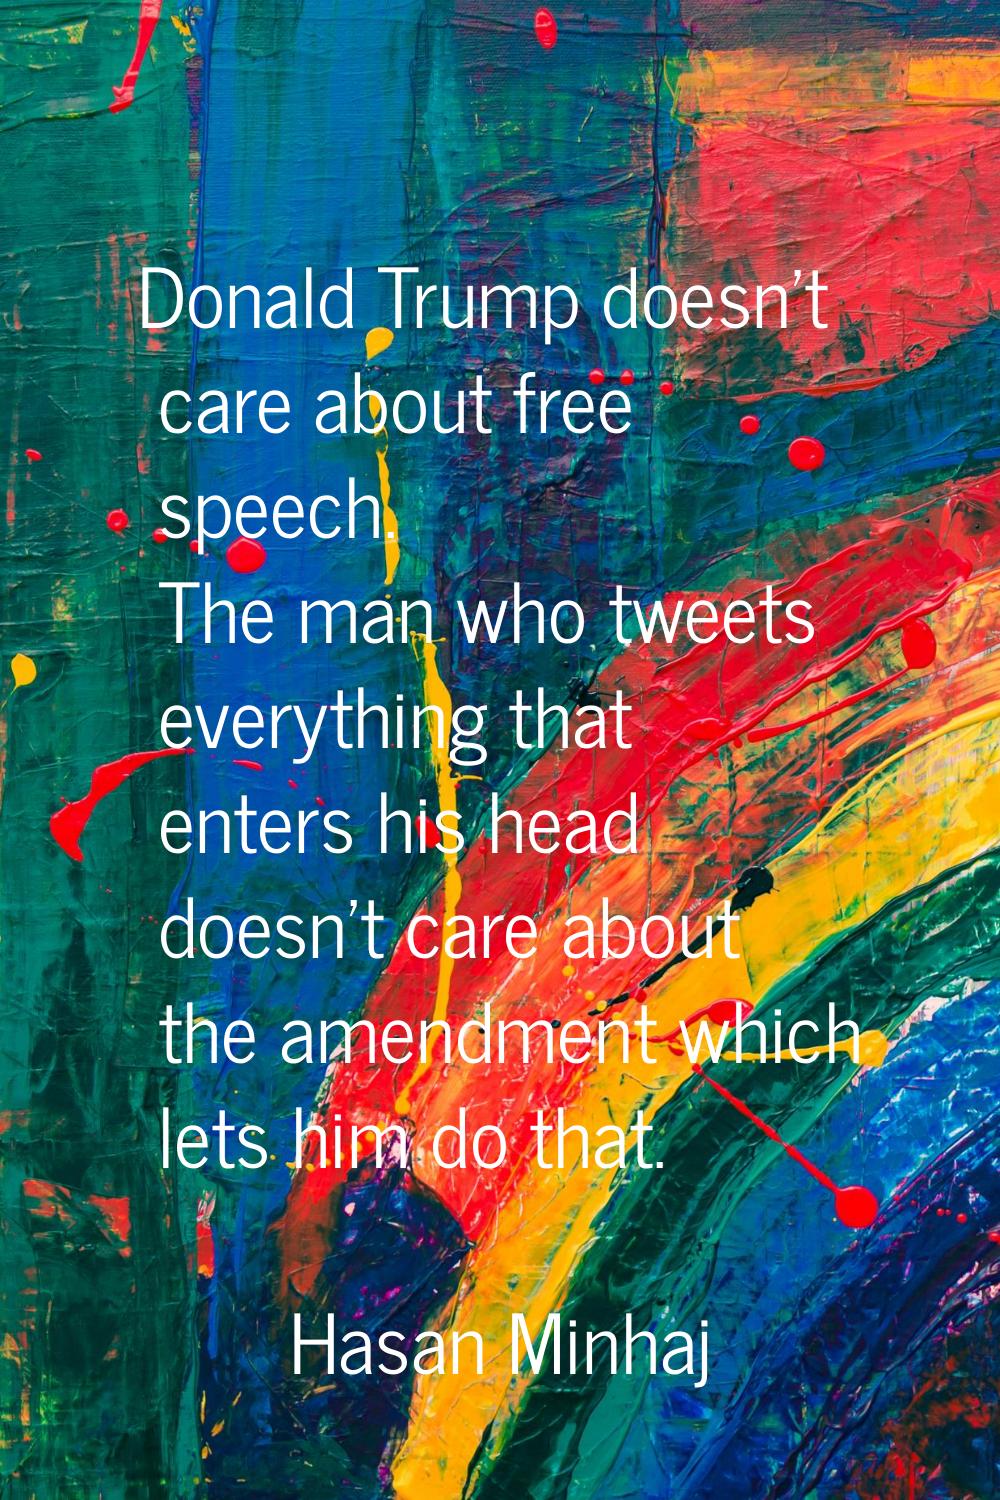 Donald Trump doesn't care about free speech. The man who tweets everything that enters his head doe